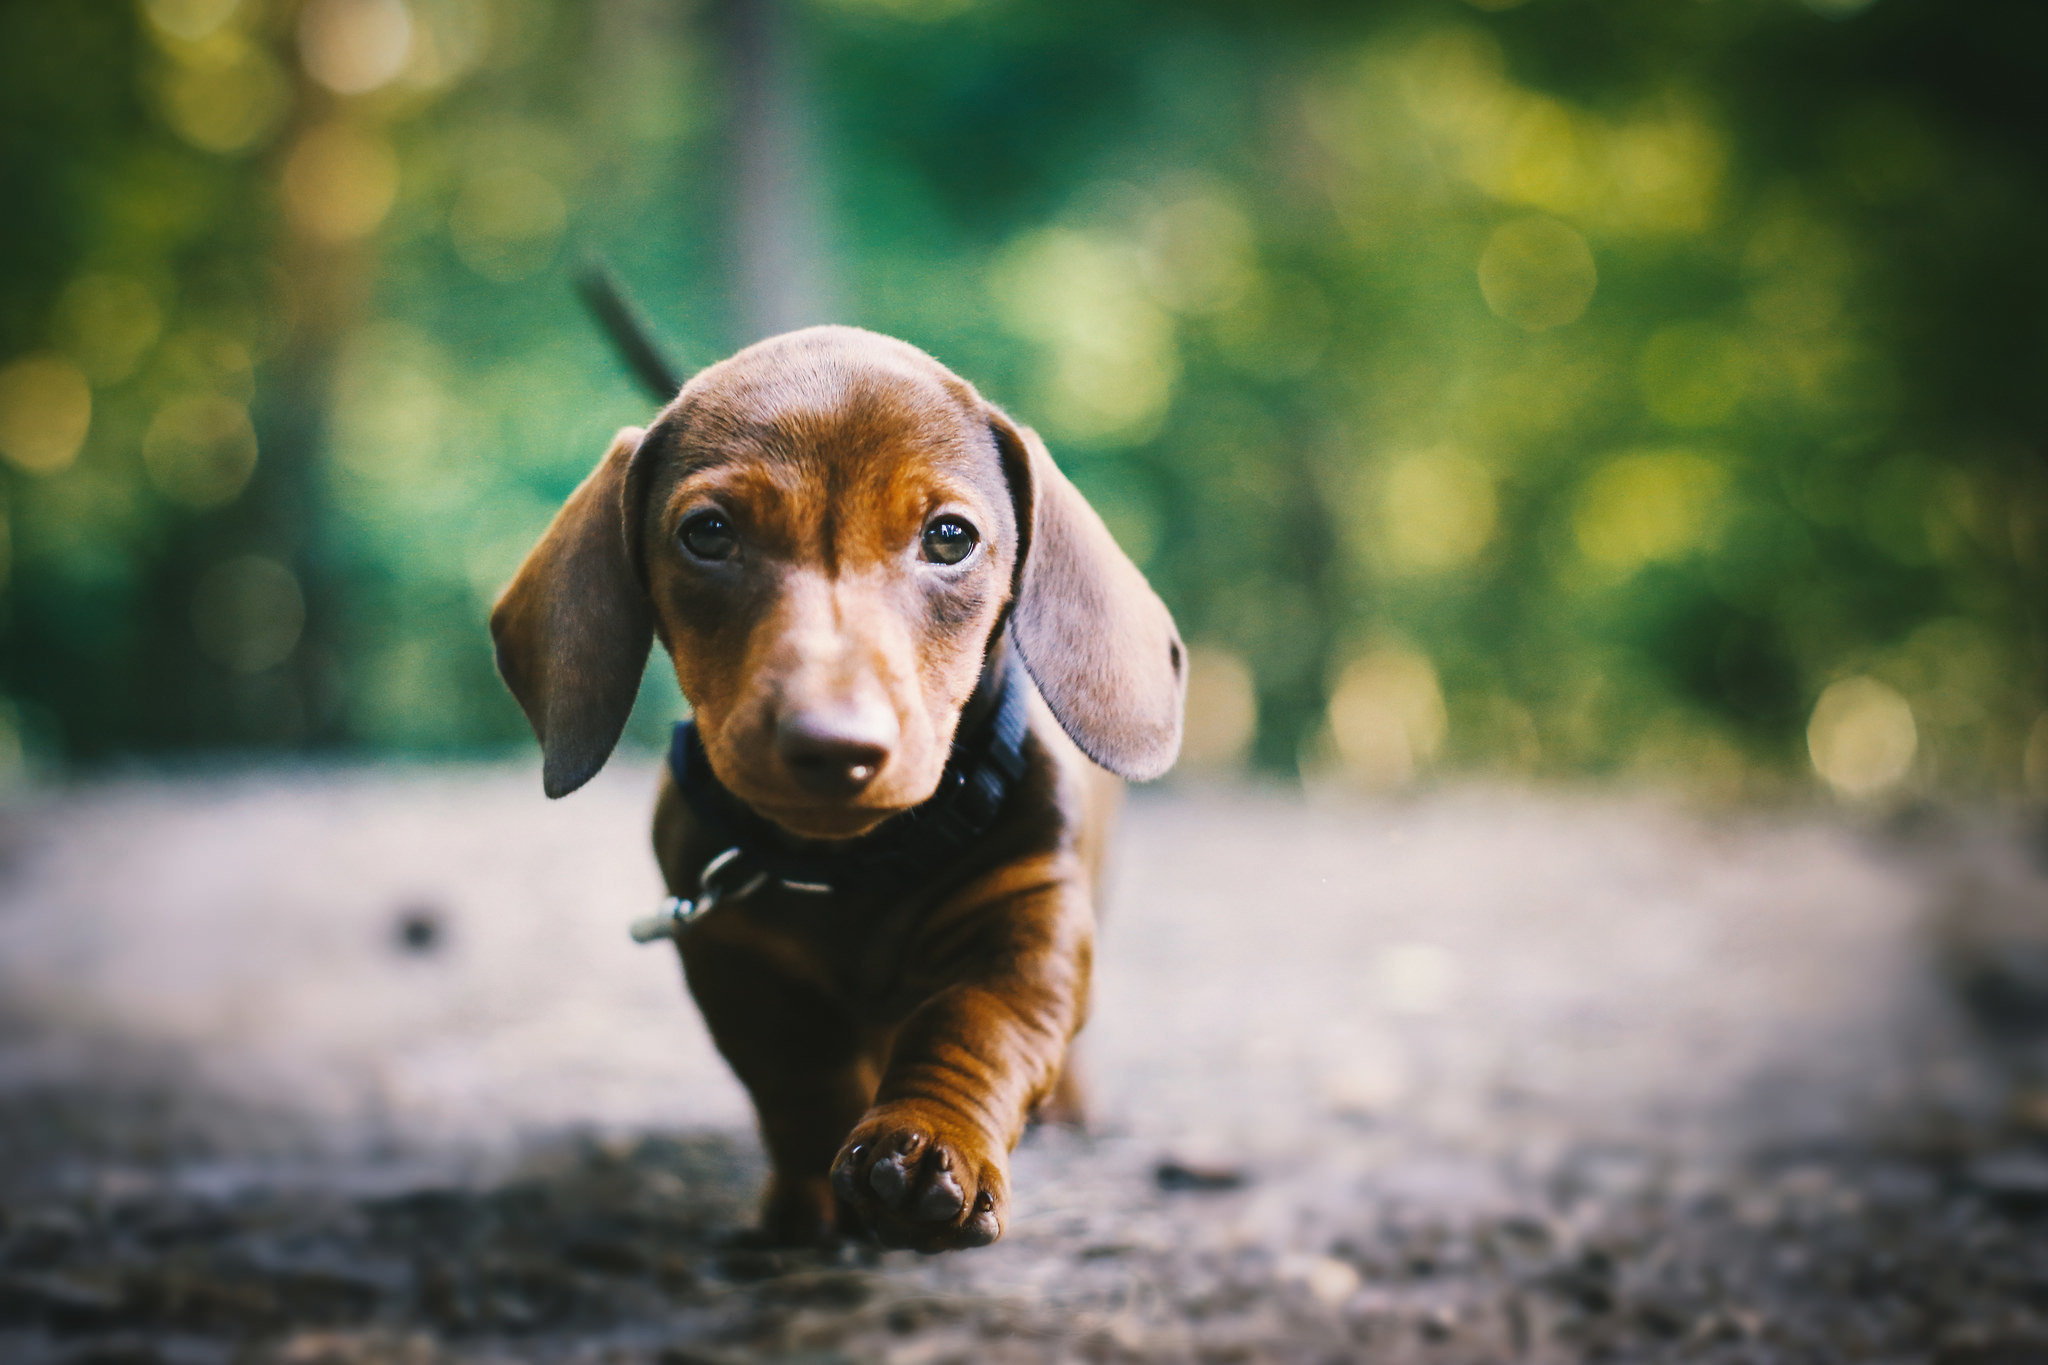 PreviousNext. Previous Image Next Image. dachshund wallpaper 1280×1024 wallpapers dachshund 1280×1024